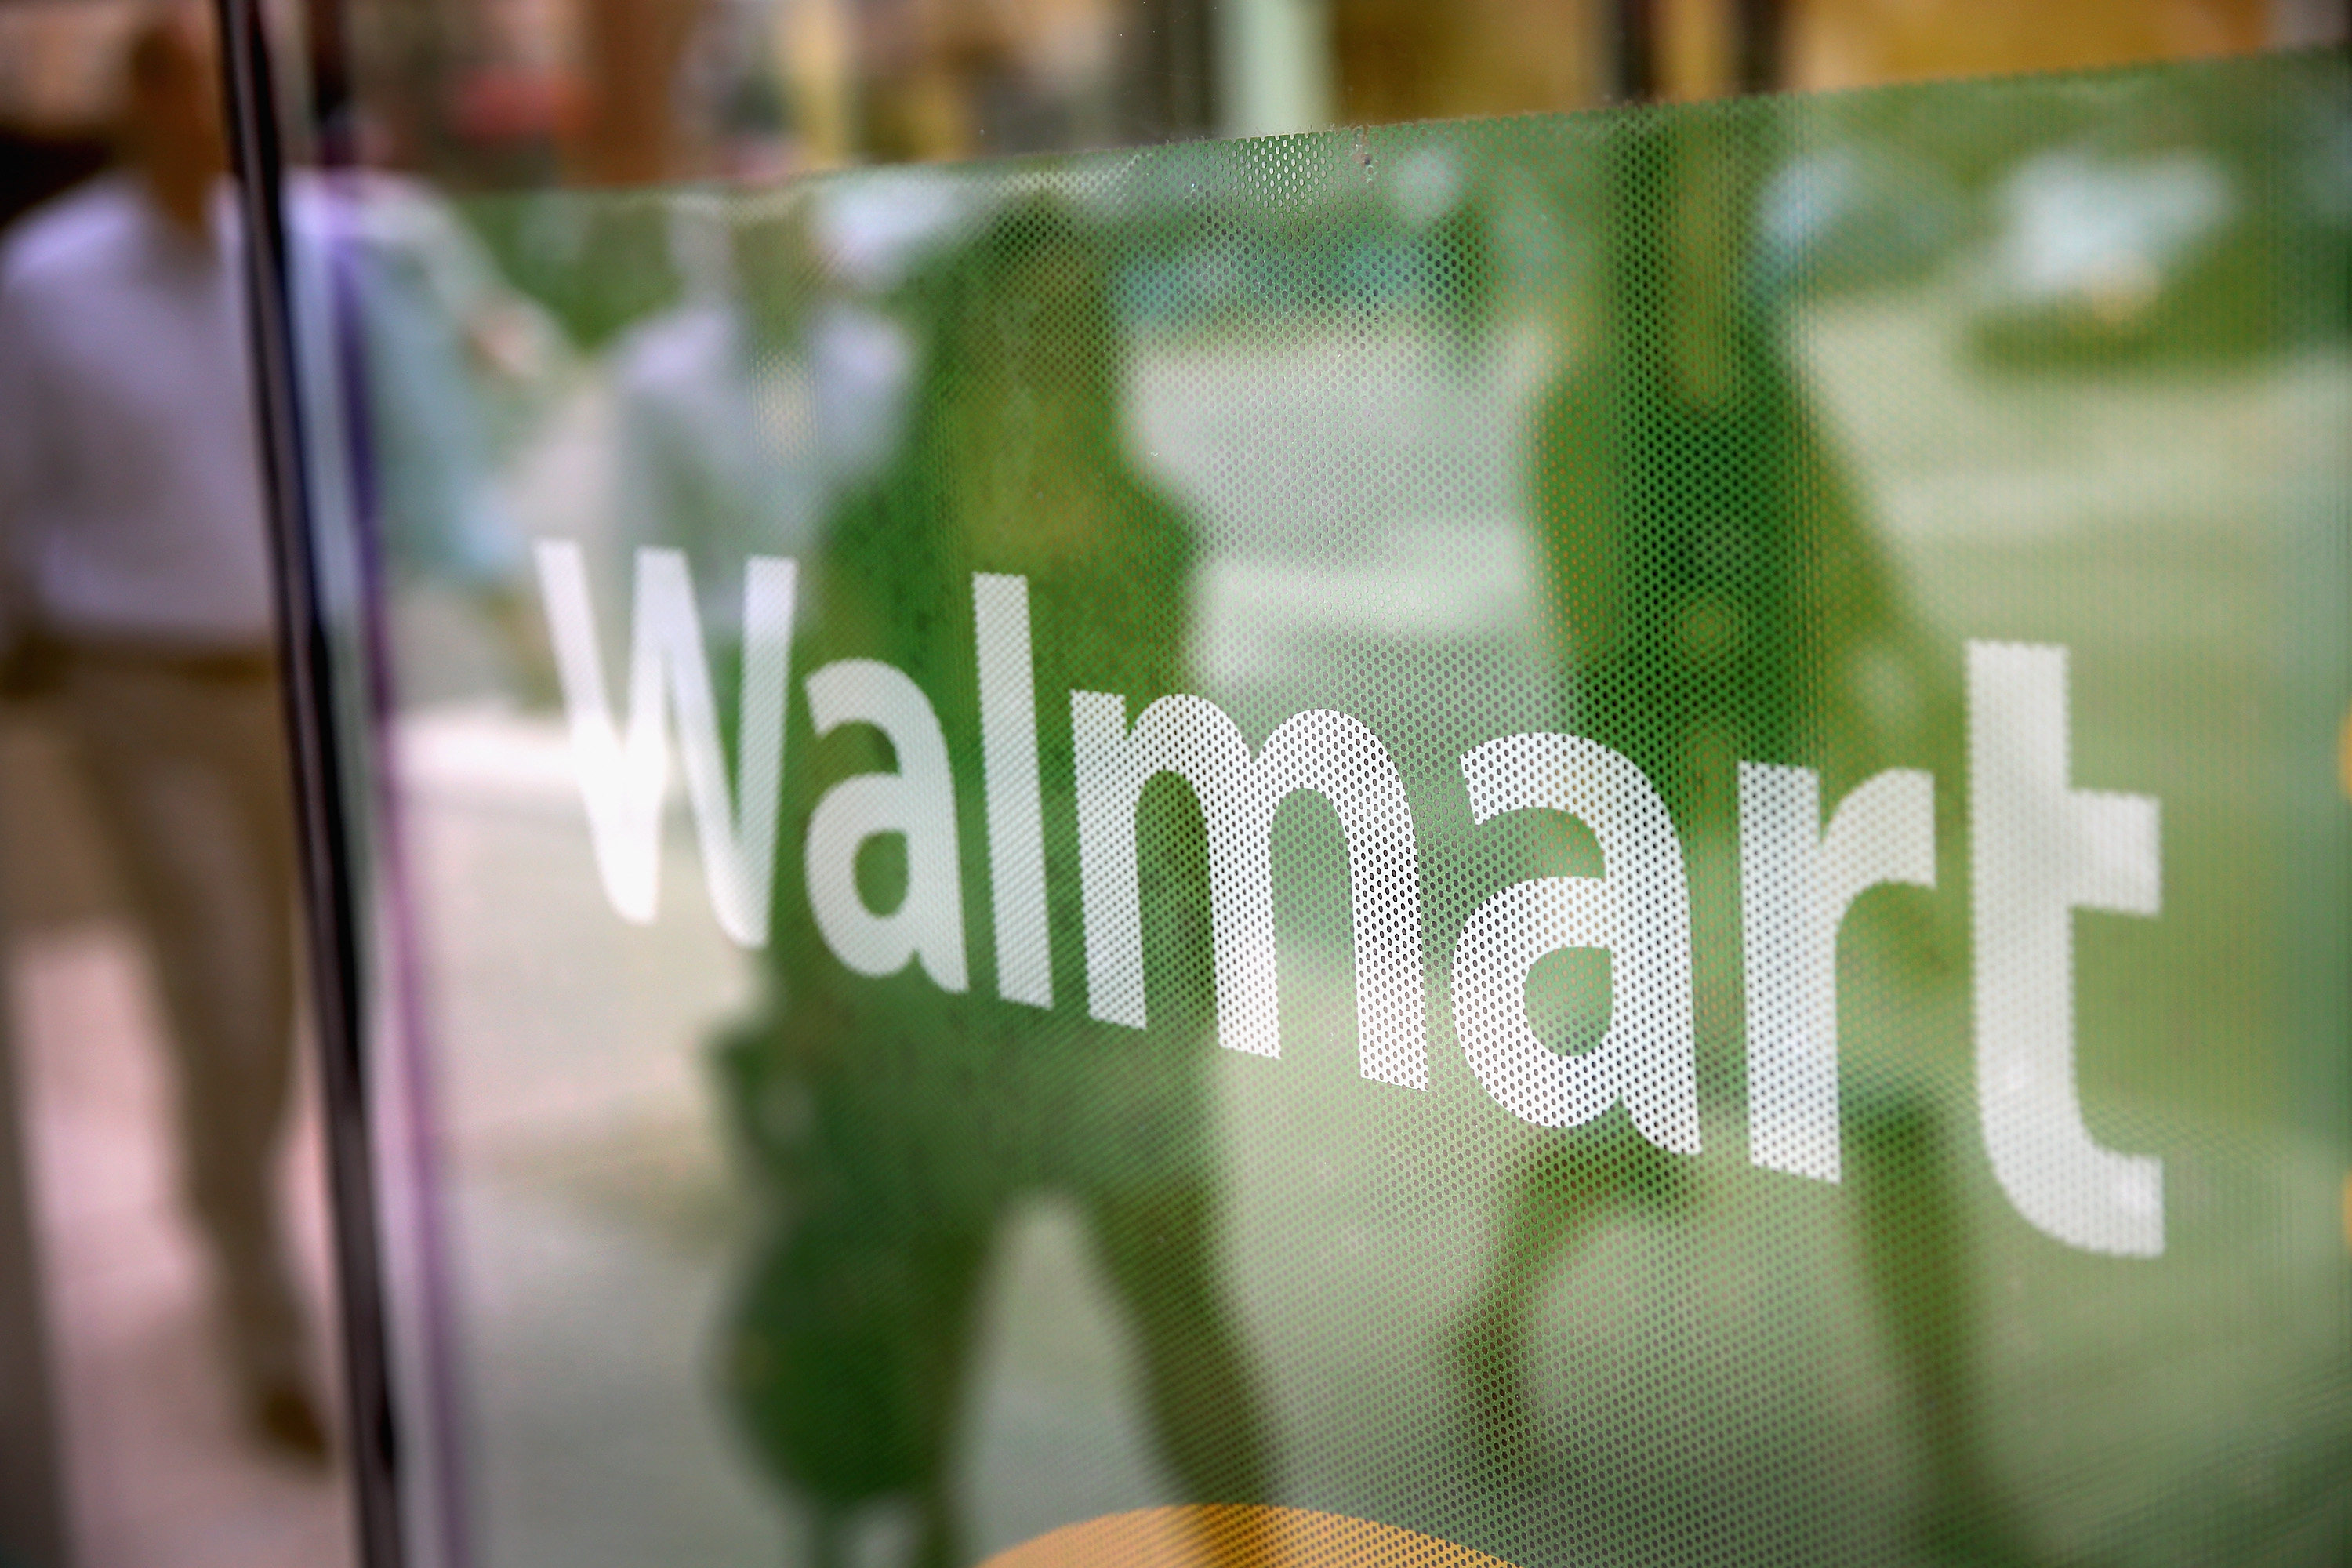 Canada is investigating allegations of Uygur forced labour in the supply chains and operations of companies such as Walmart. Photo: AFP / Getty Images North America 